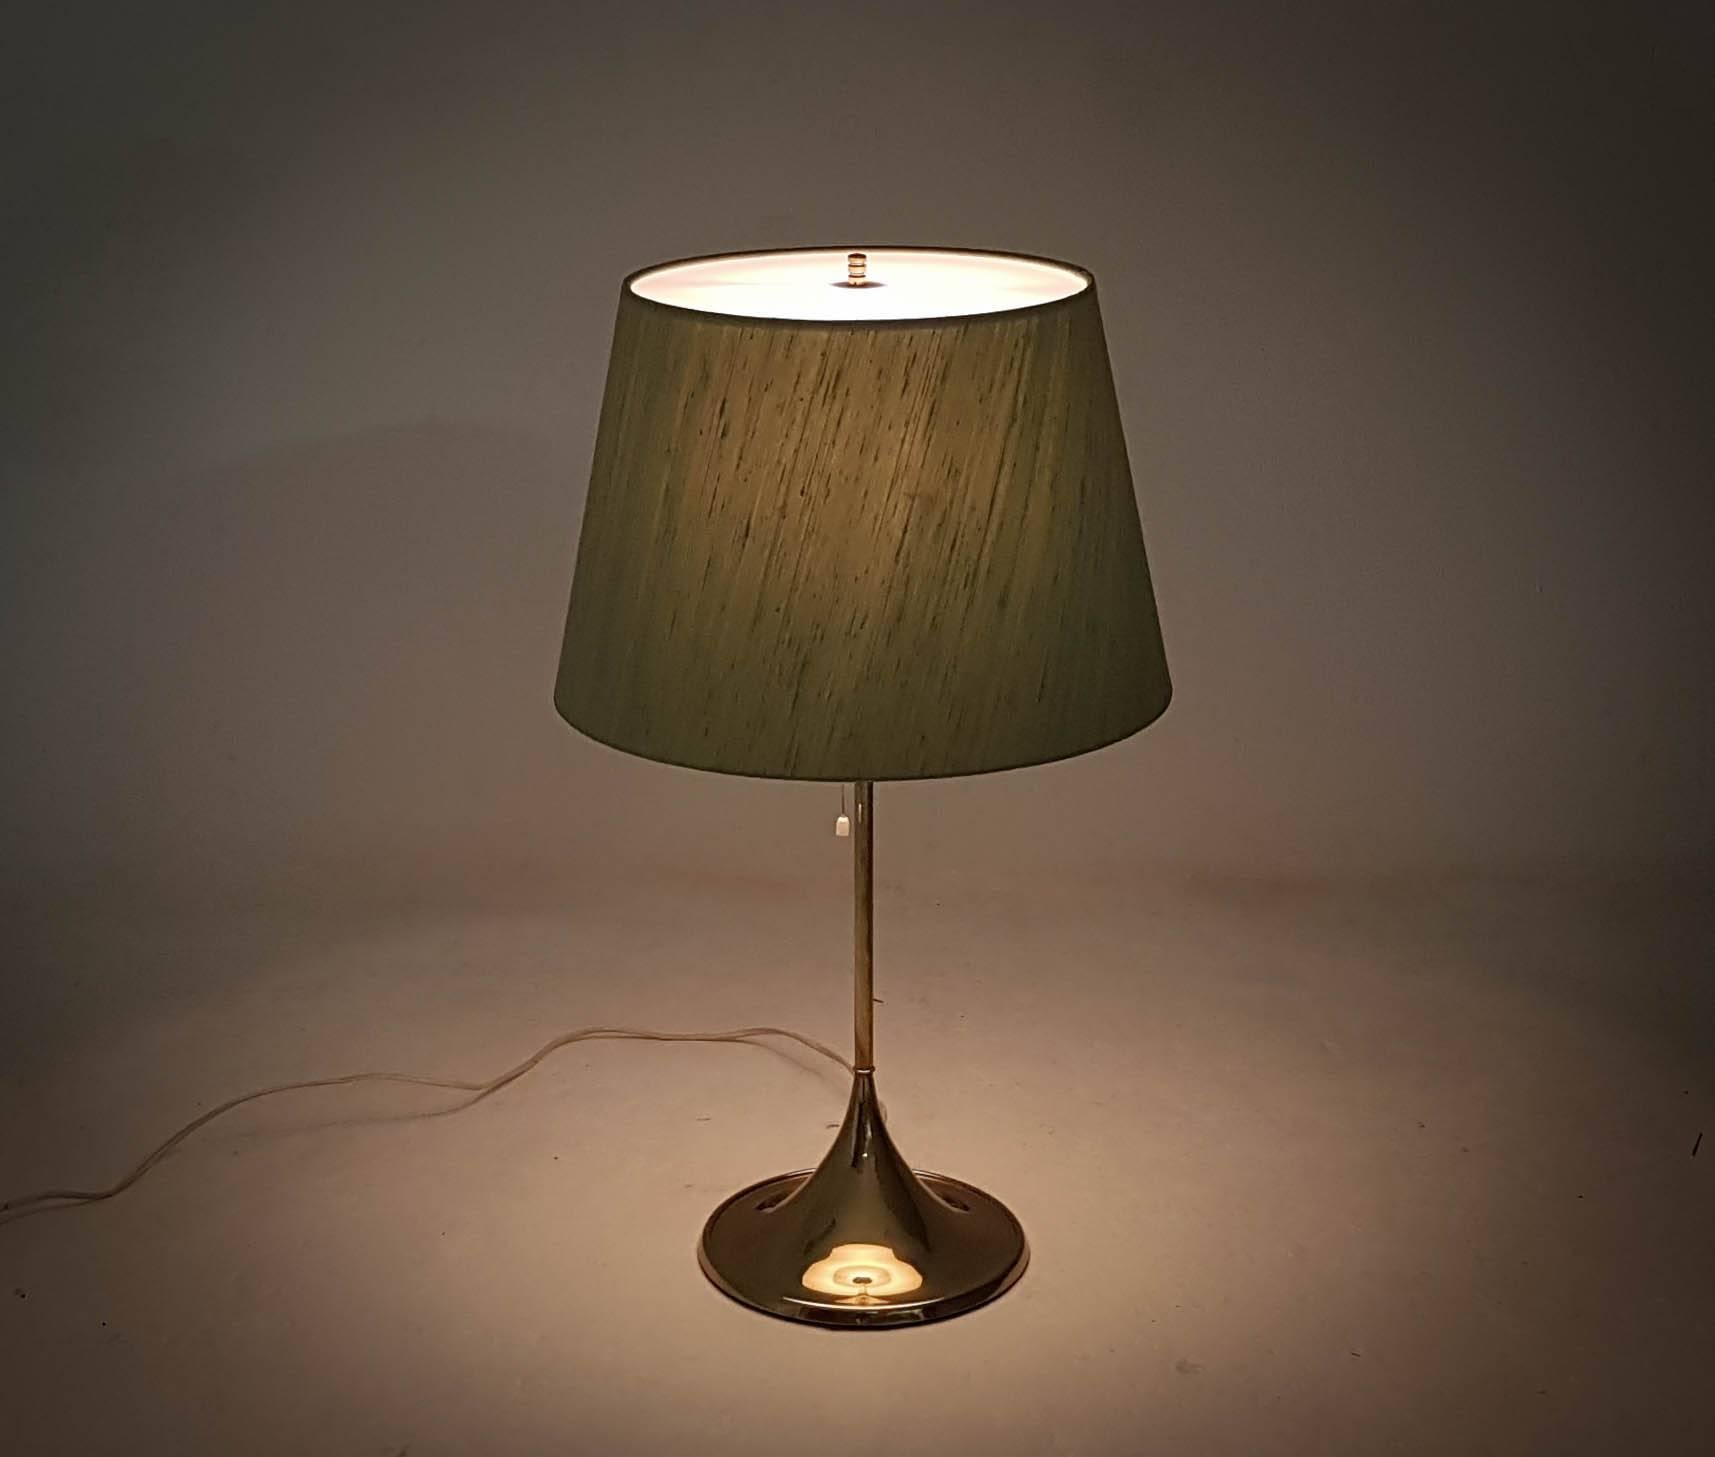 Table version of the iconic Bergbom design. Cast iron base finished in brass with an opaque white perspex top on the lampshade. Very nice condition.